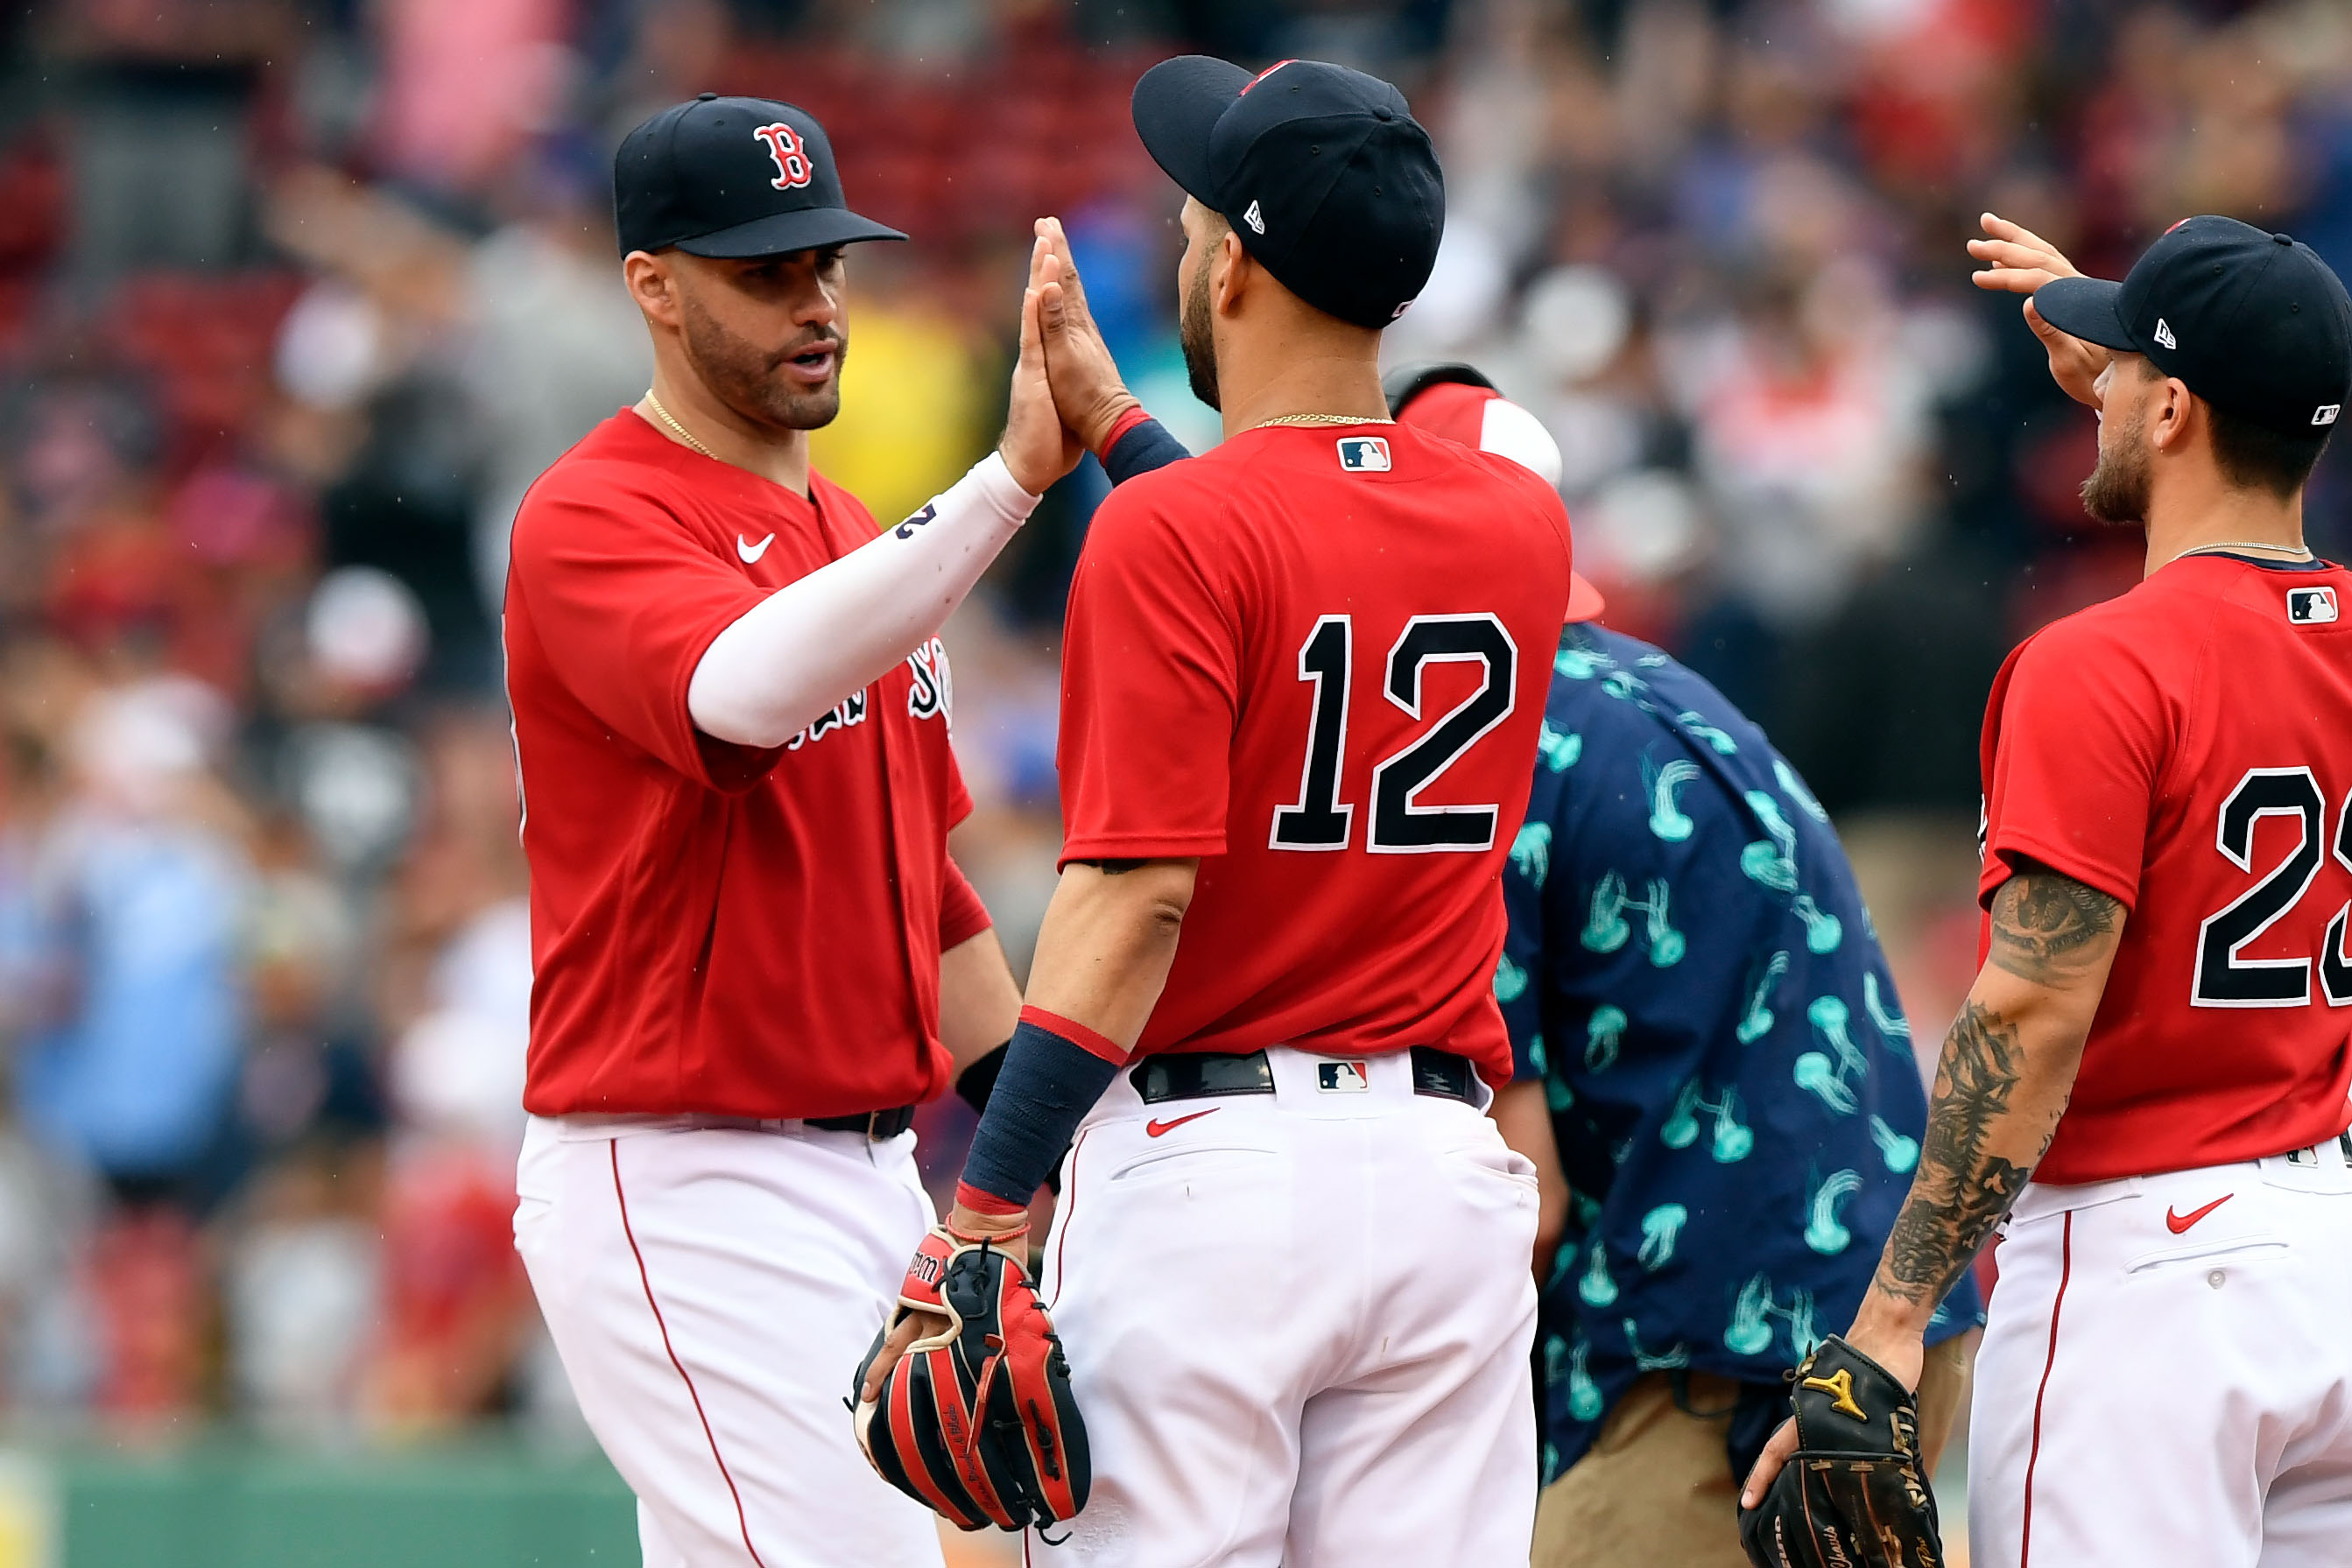 Sox mid-term report; All Stars and Pedey's big day